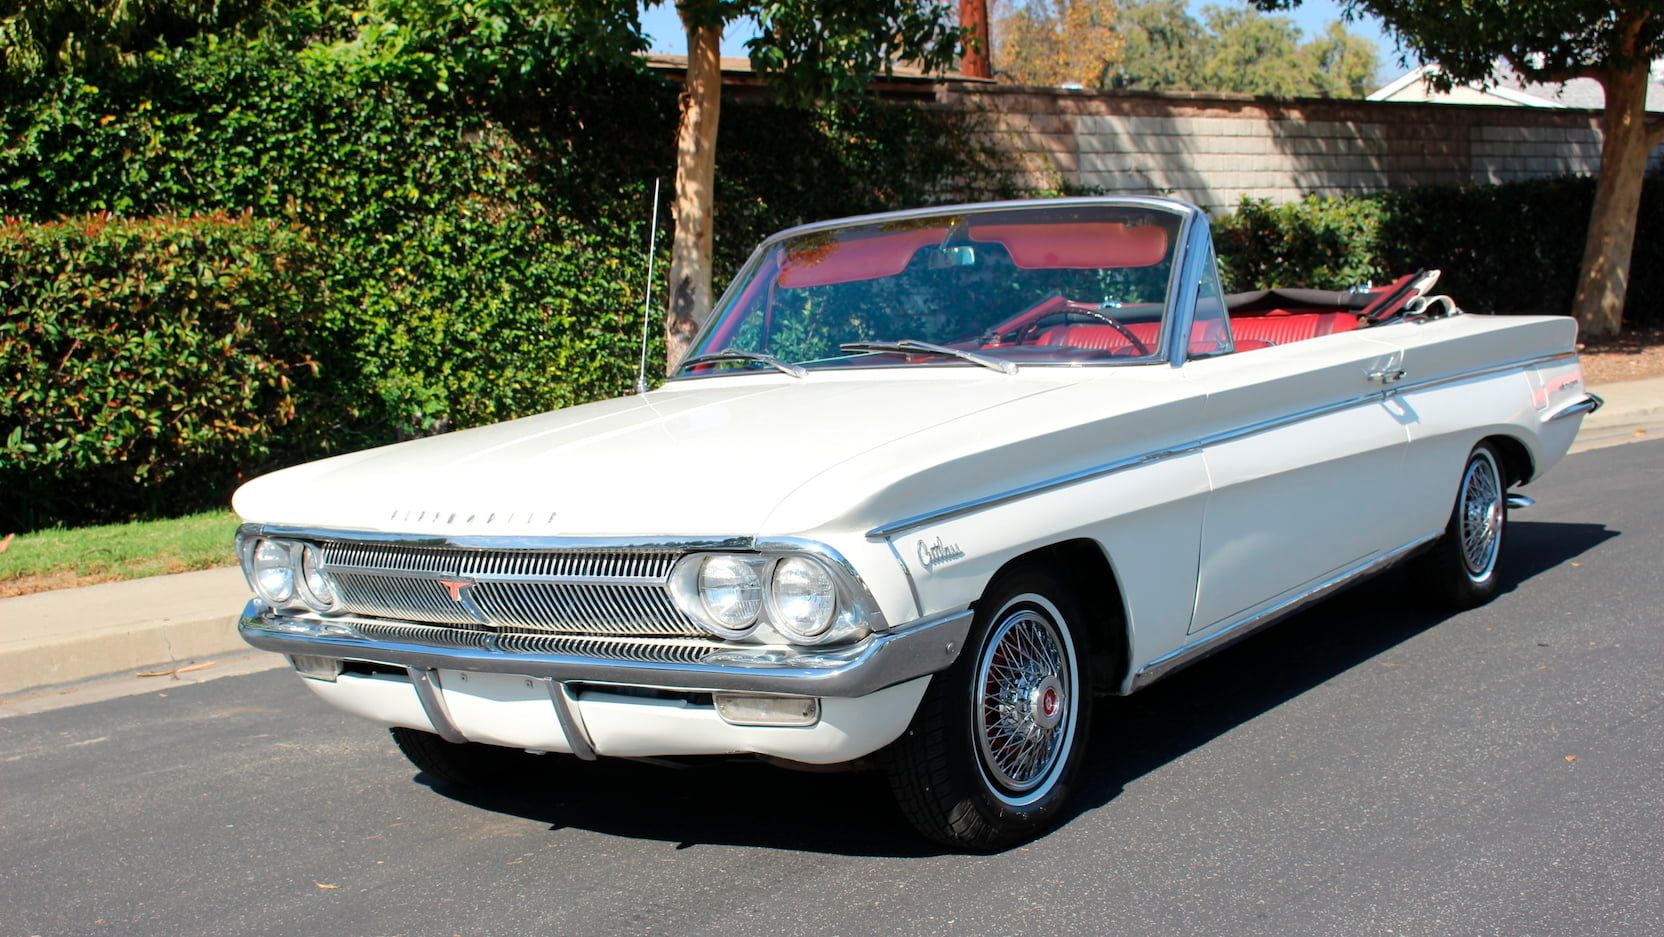 1962 Oldsmobile Cutlass F85: The muscle car that brought the turbocharged engine.